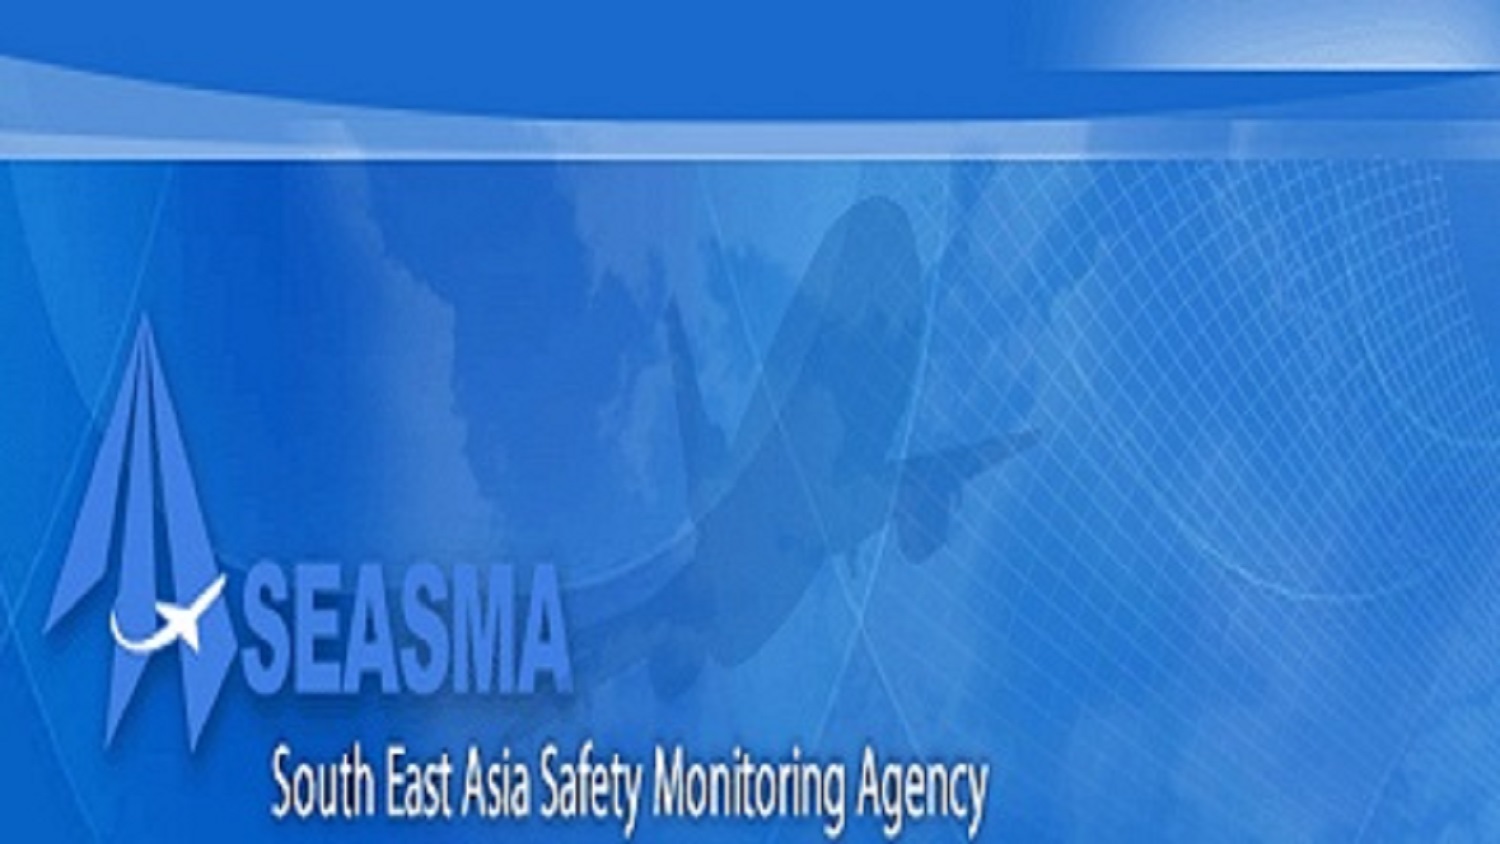 South East Asia Safety Monitoring Agency 